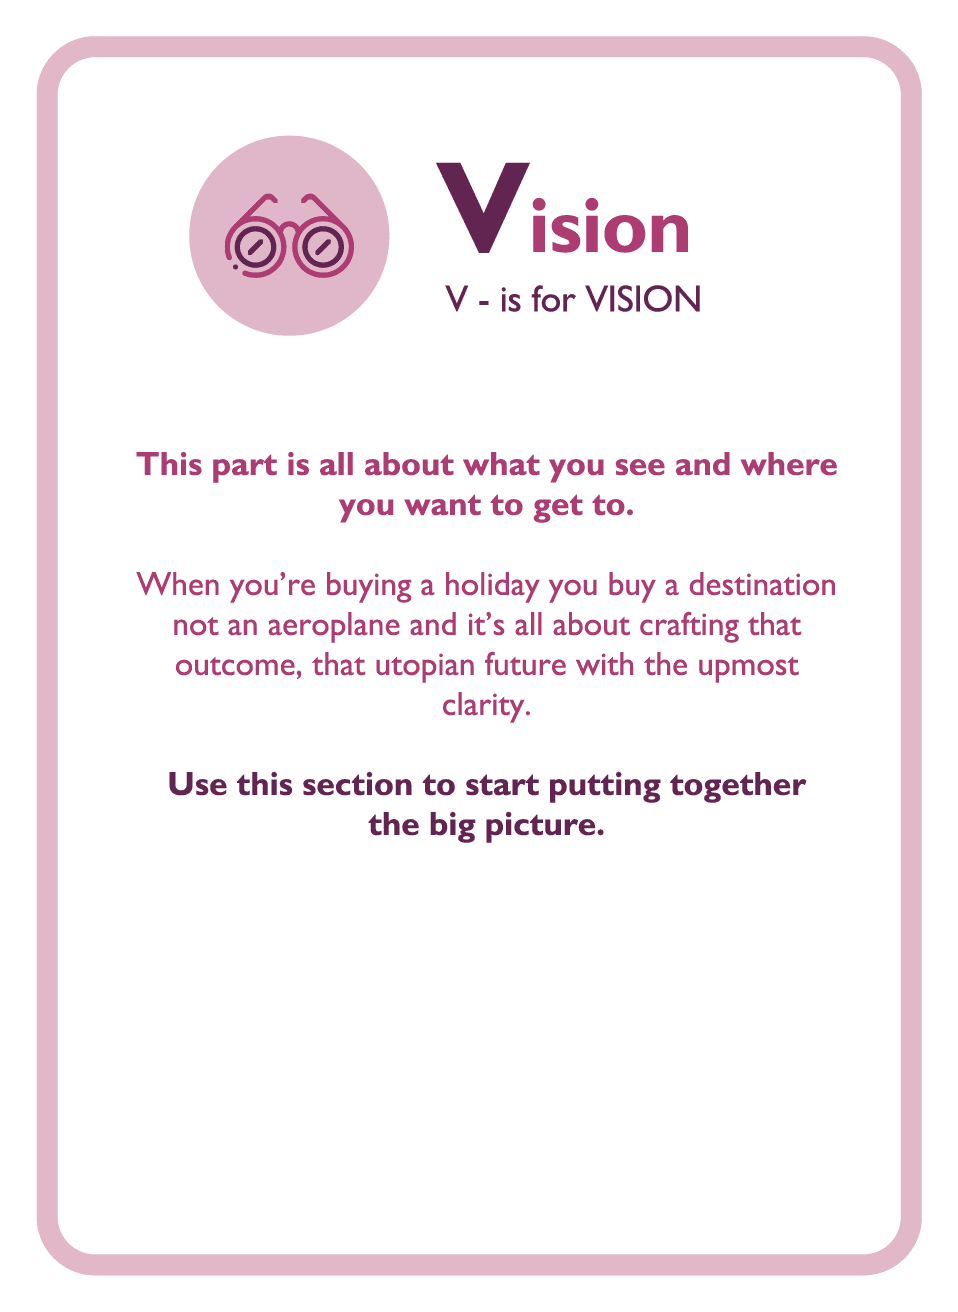 Coaching card titled Vision